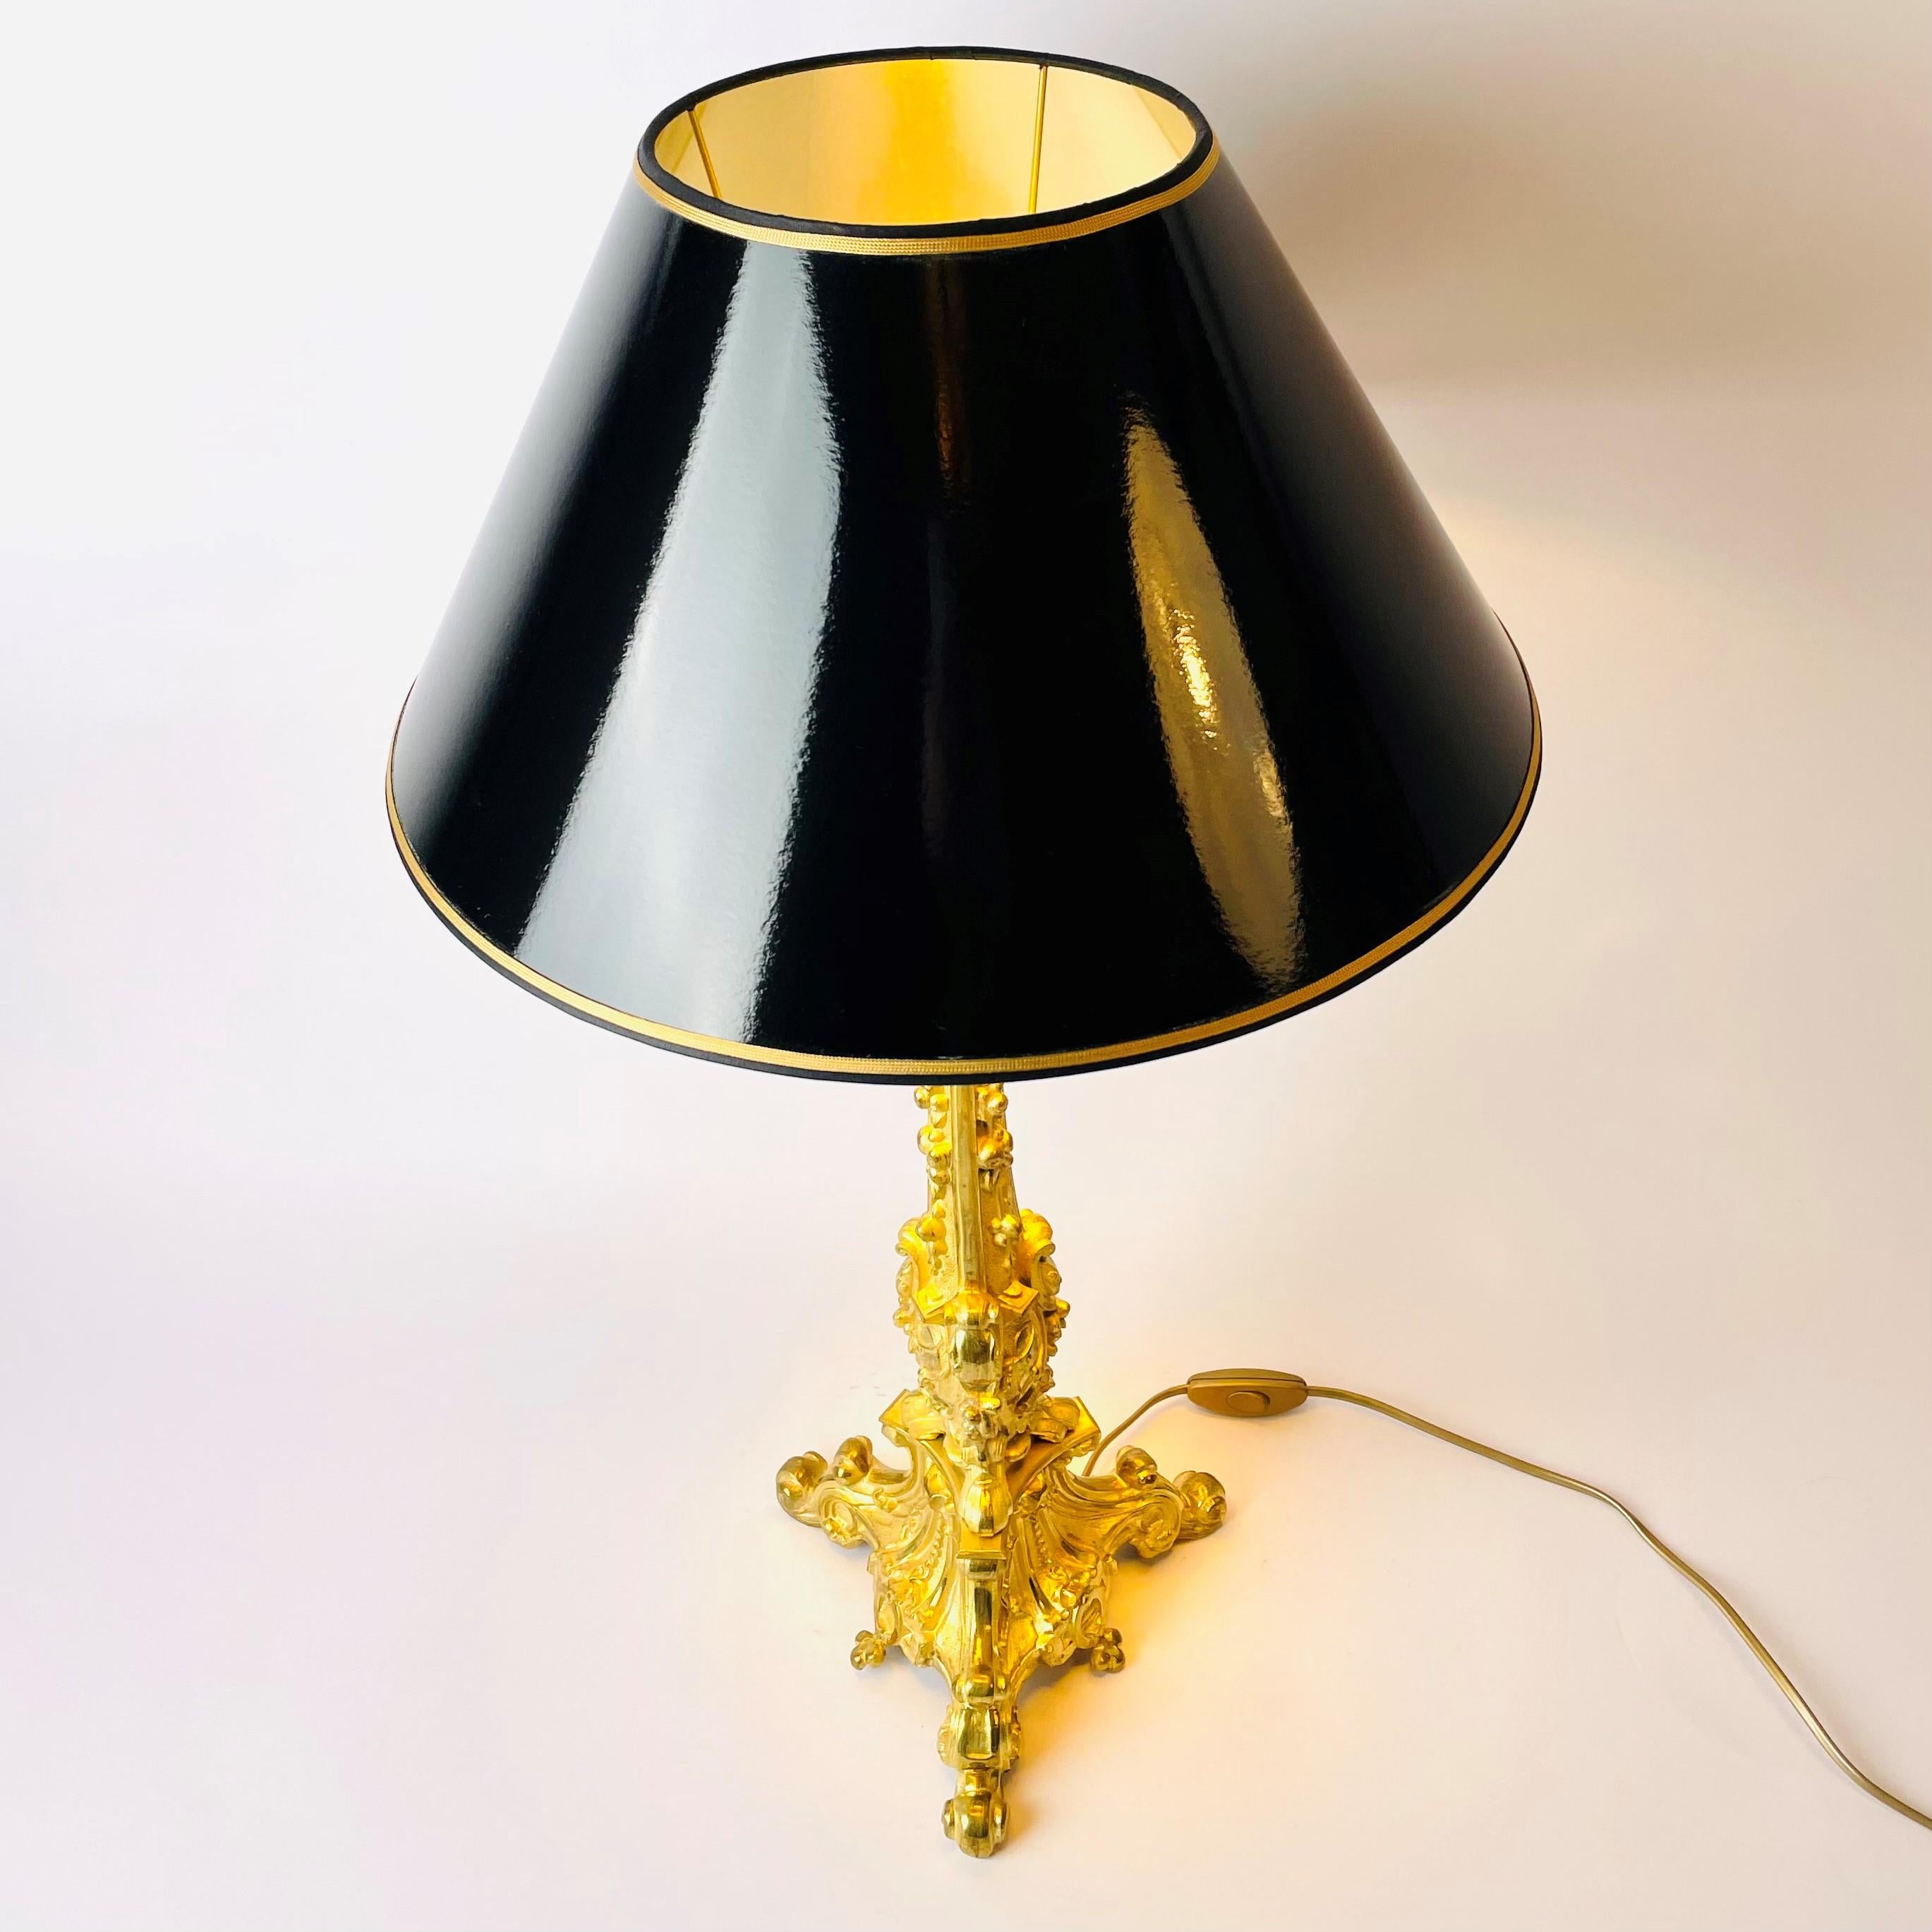 Large Rococo Revival Table Lamp in Gilded Bronze, Mid-19th Century For Sale 2